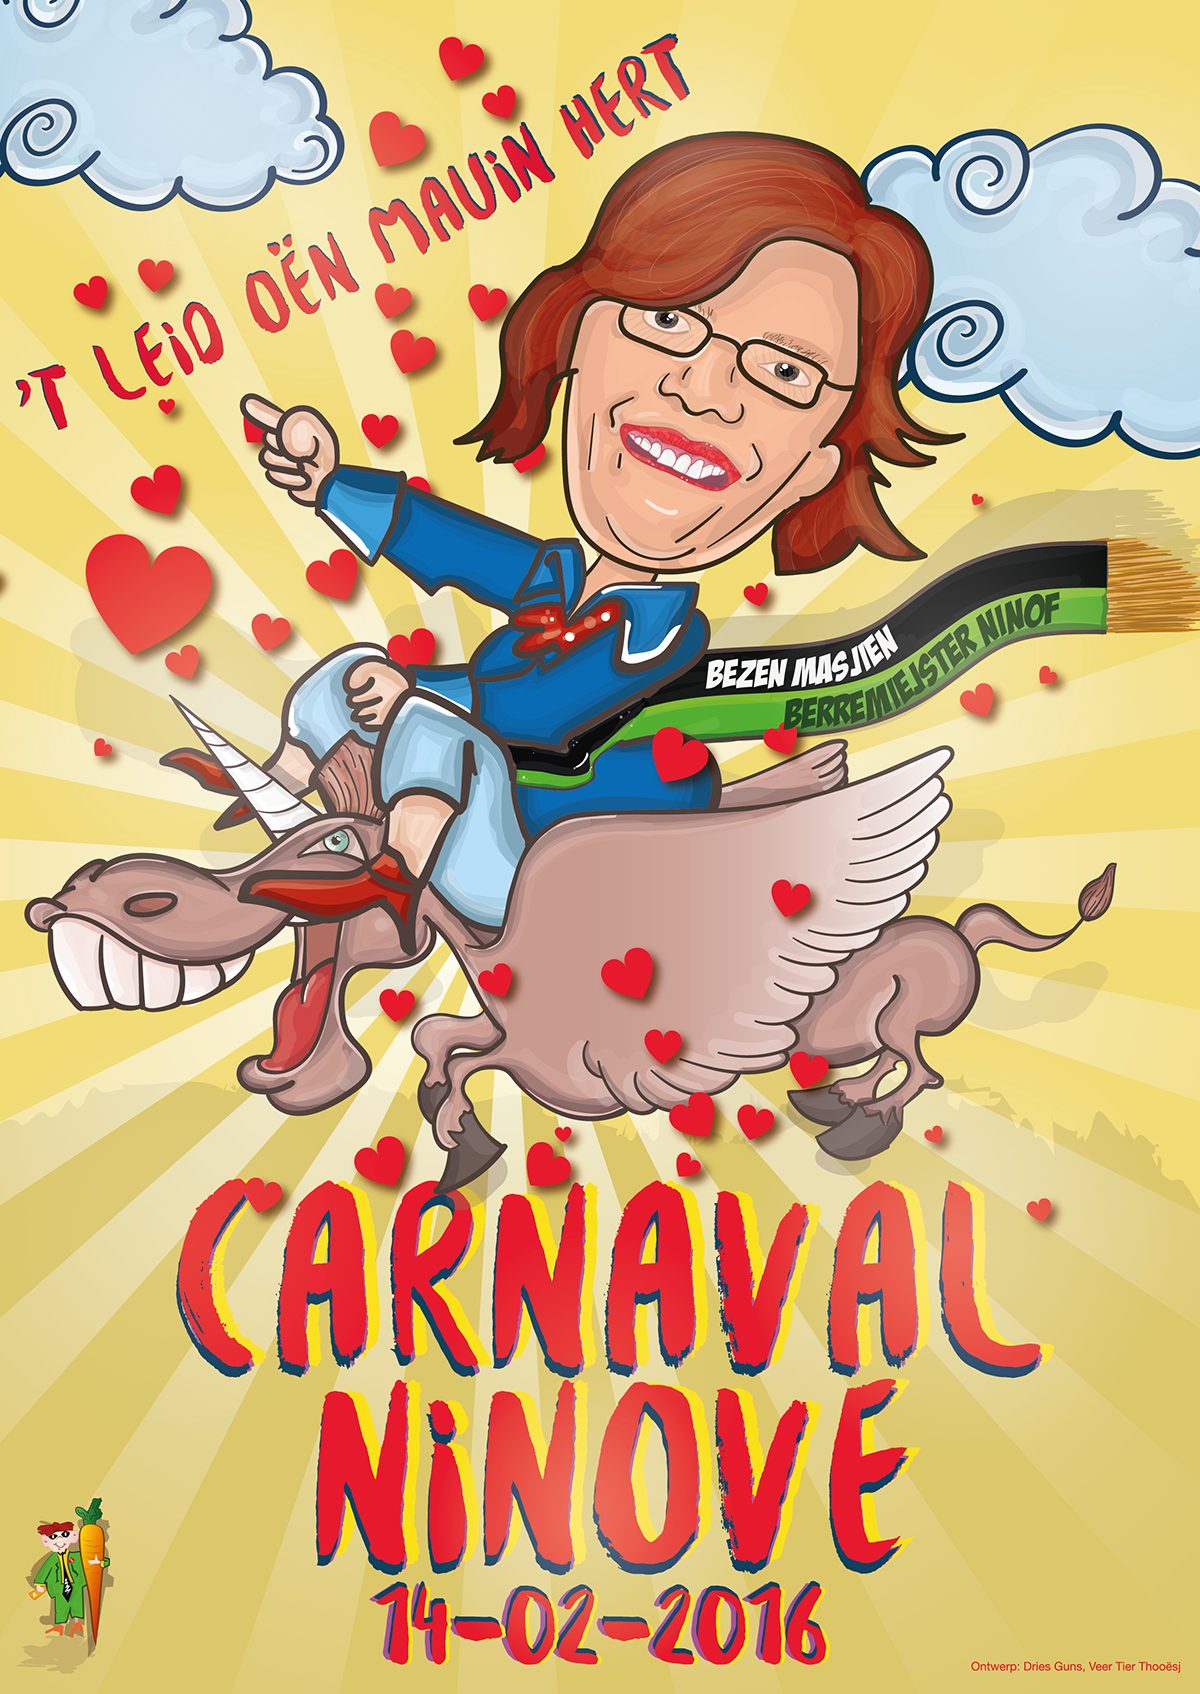 Carnival Ninove posters contest